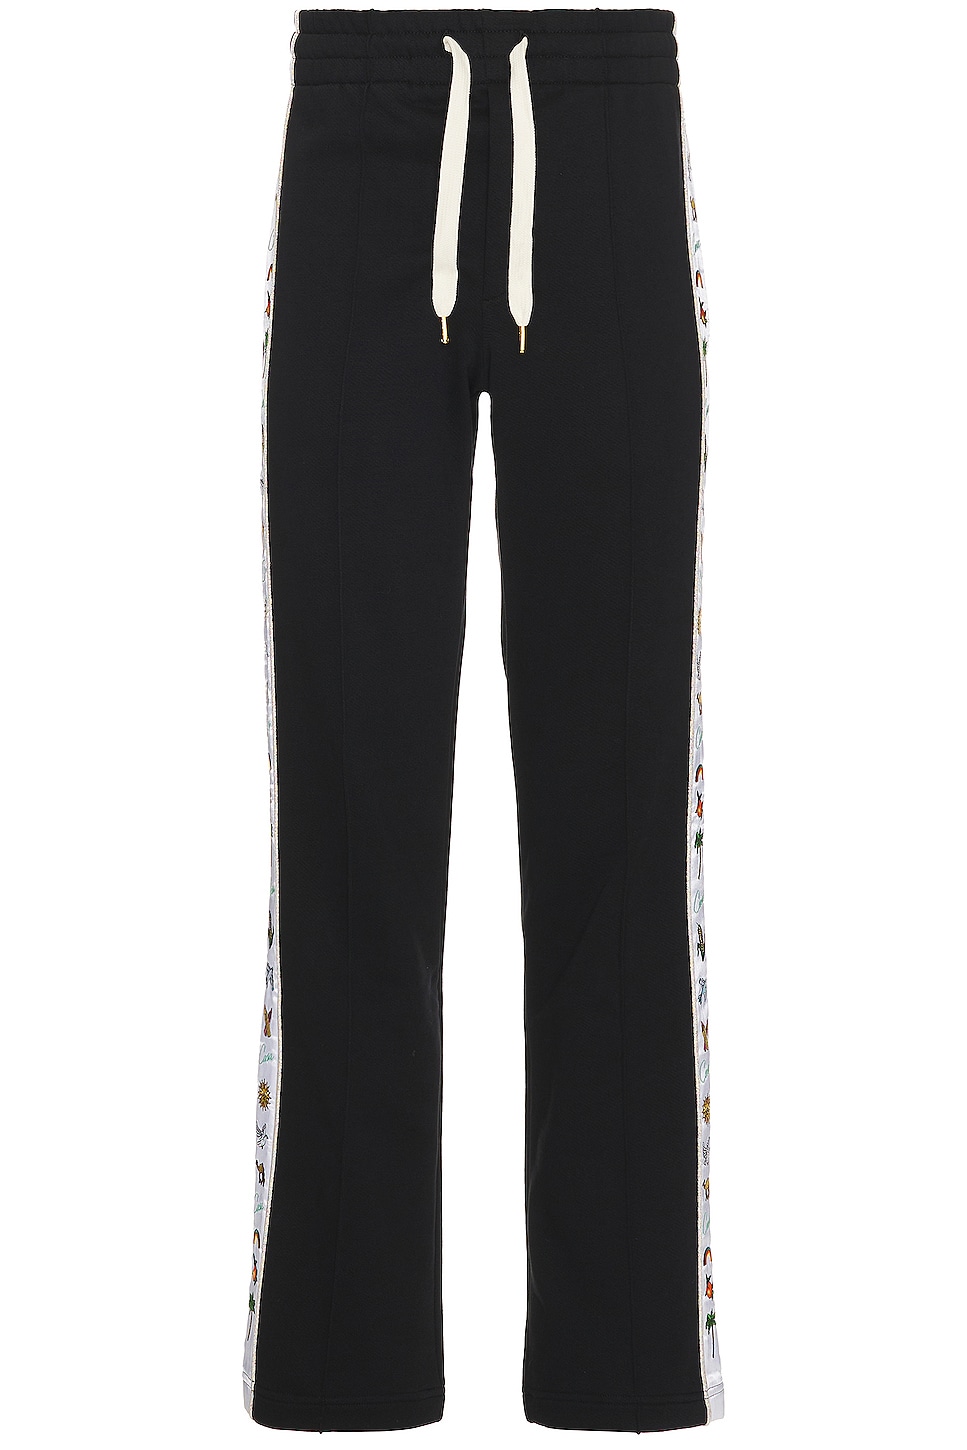 Image 1 of Casablanca Embroidered Satin Tape Sweatpant in Black